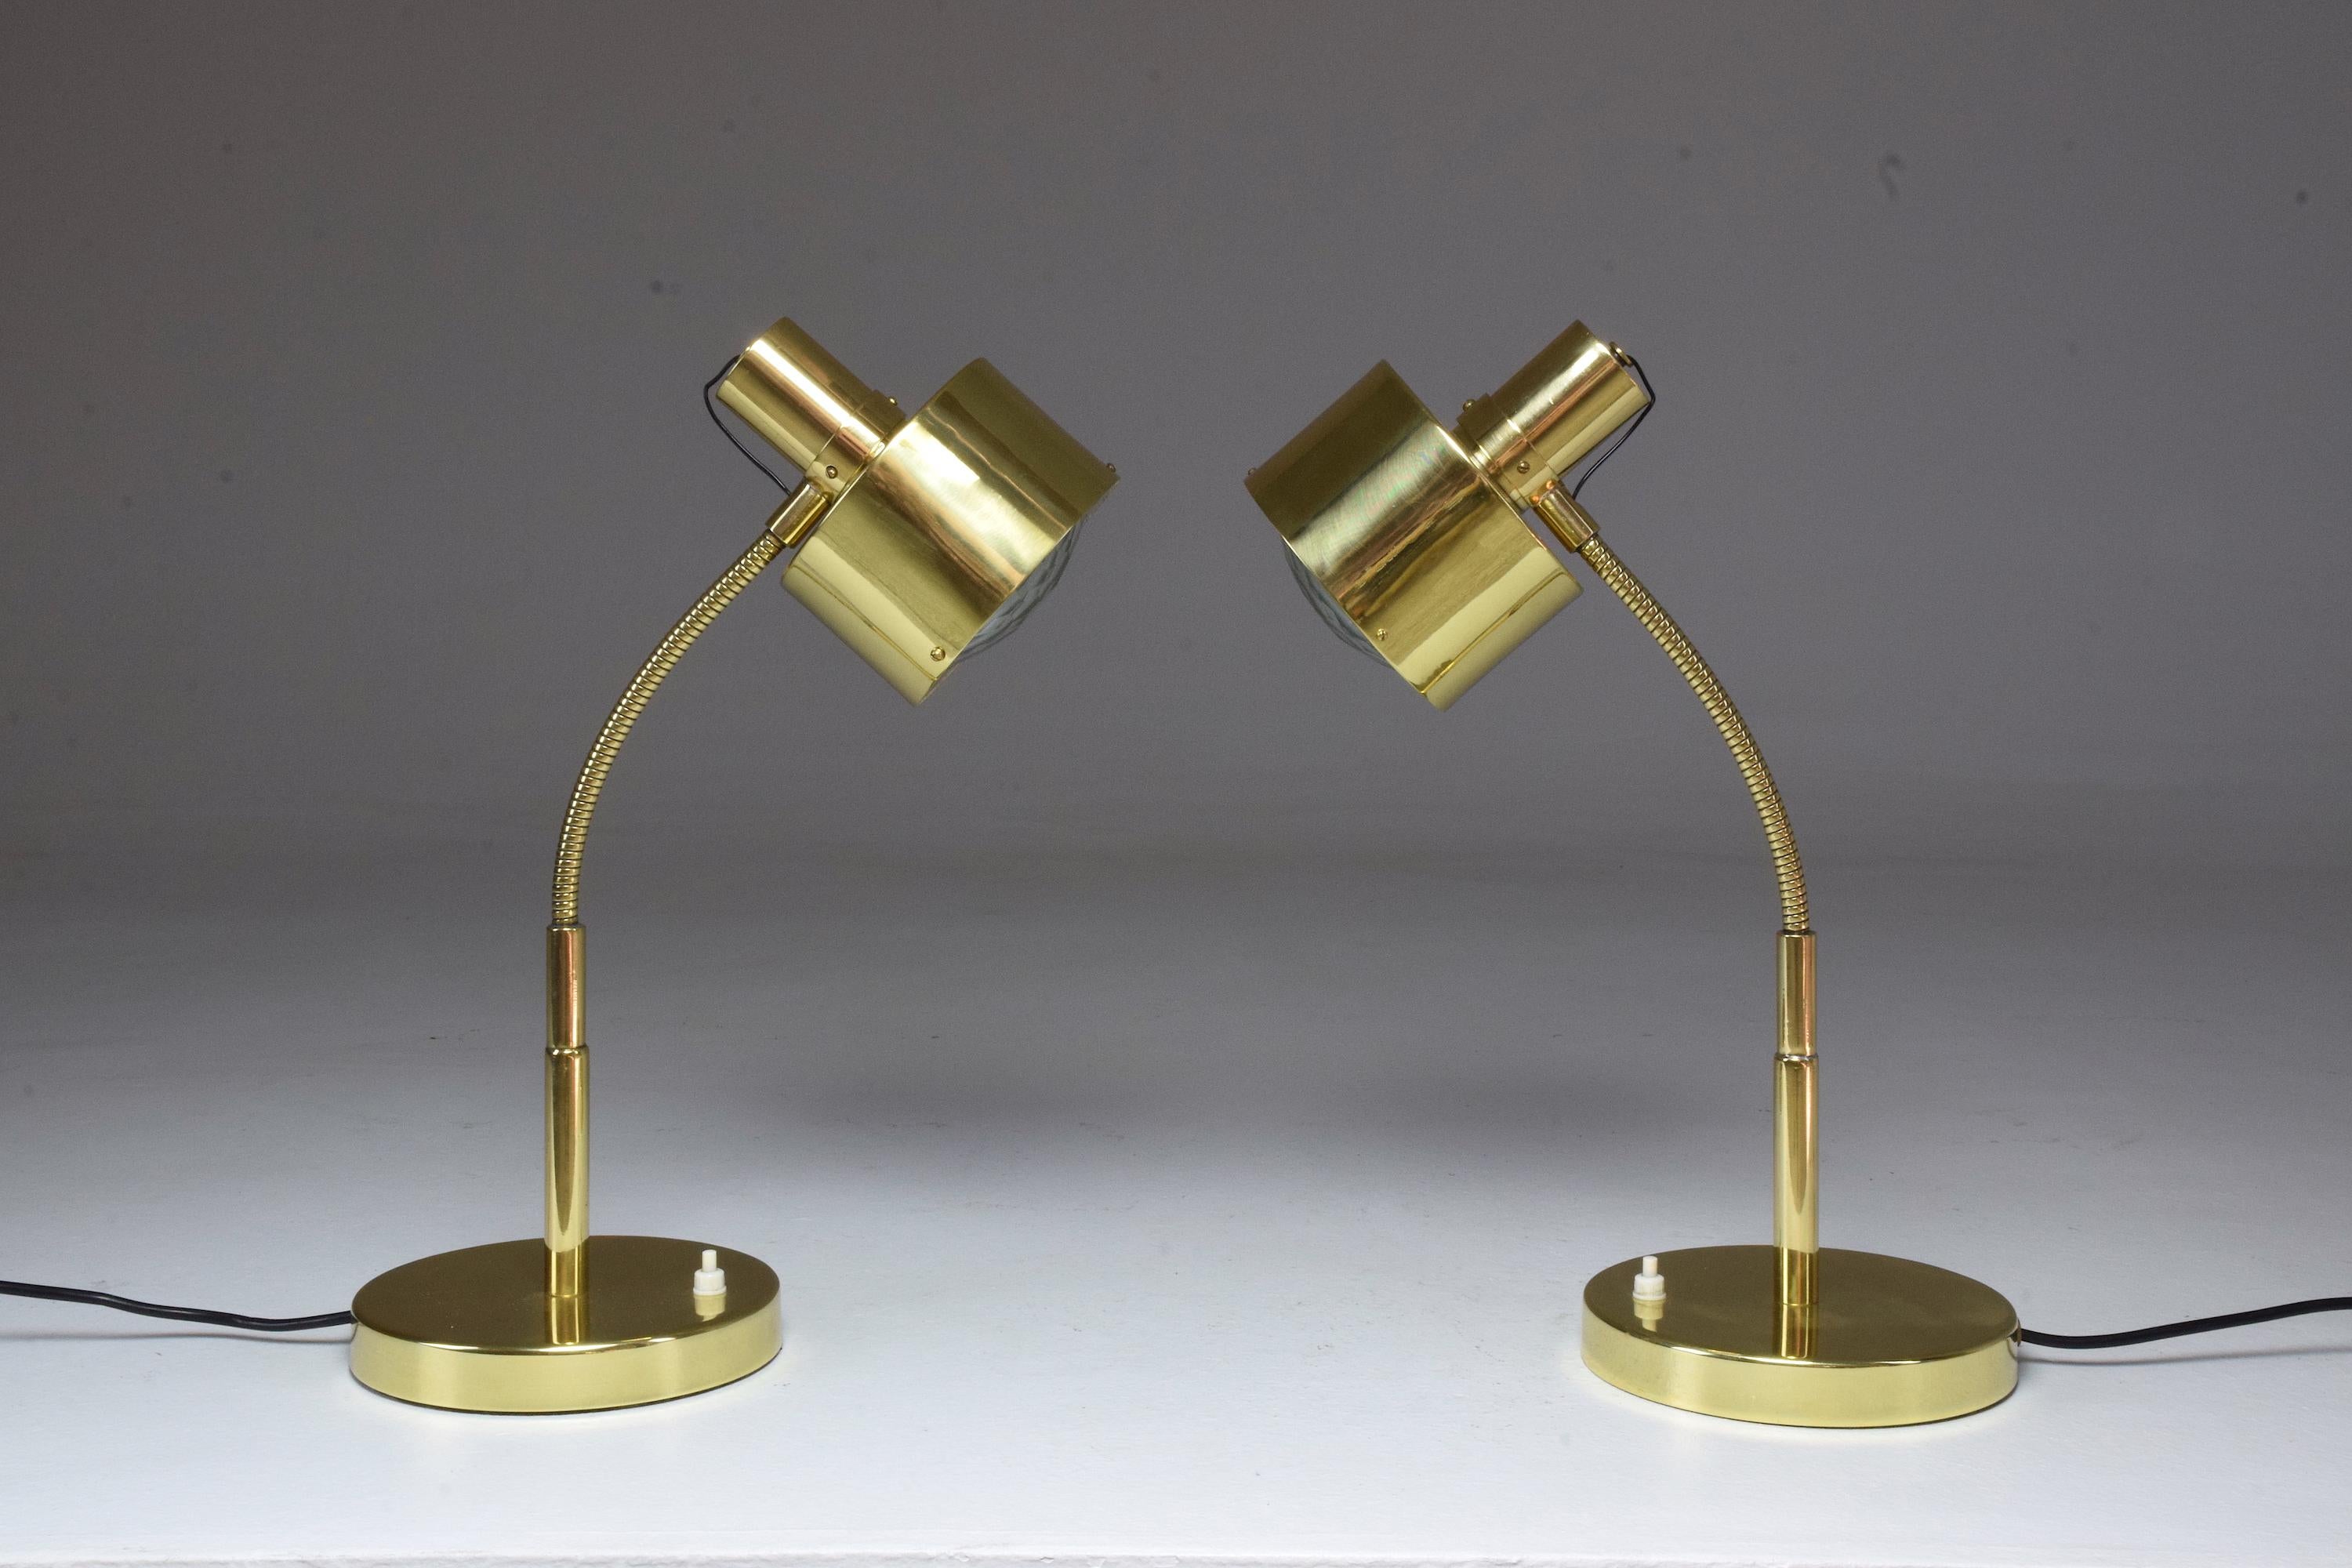 Faceted Italian Midcentury Brass Table Lamps in the Manner of Max Ingrand, 1960s